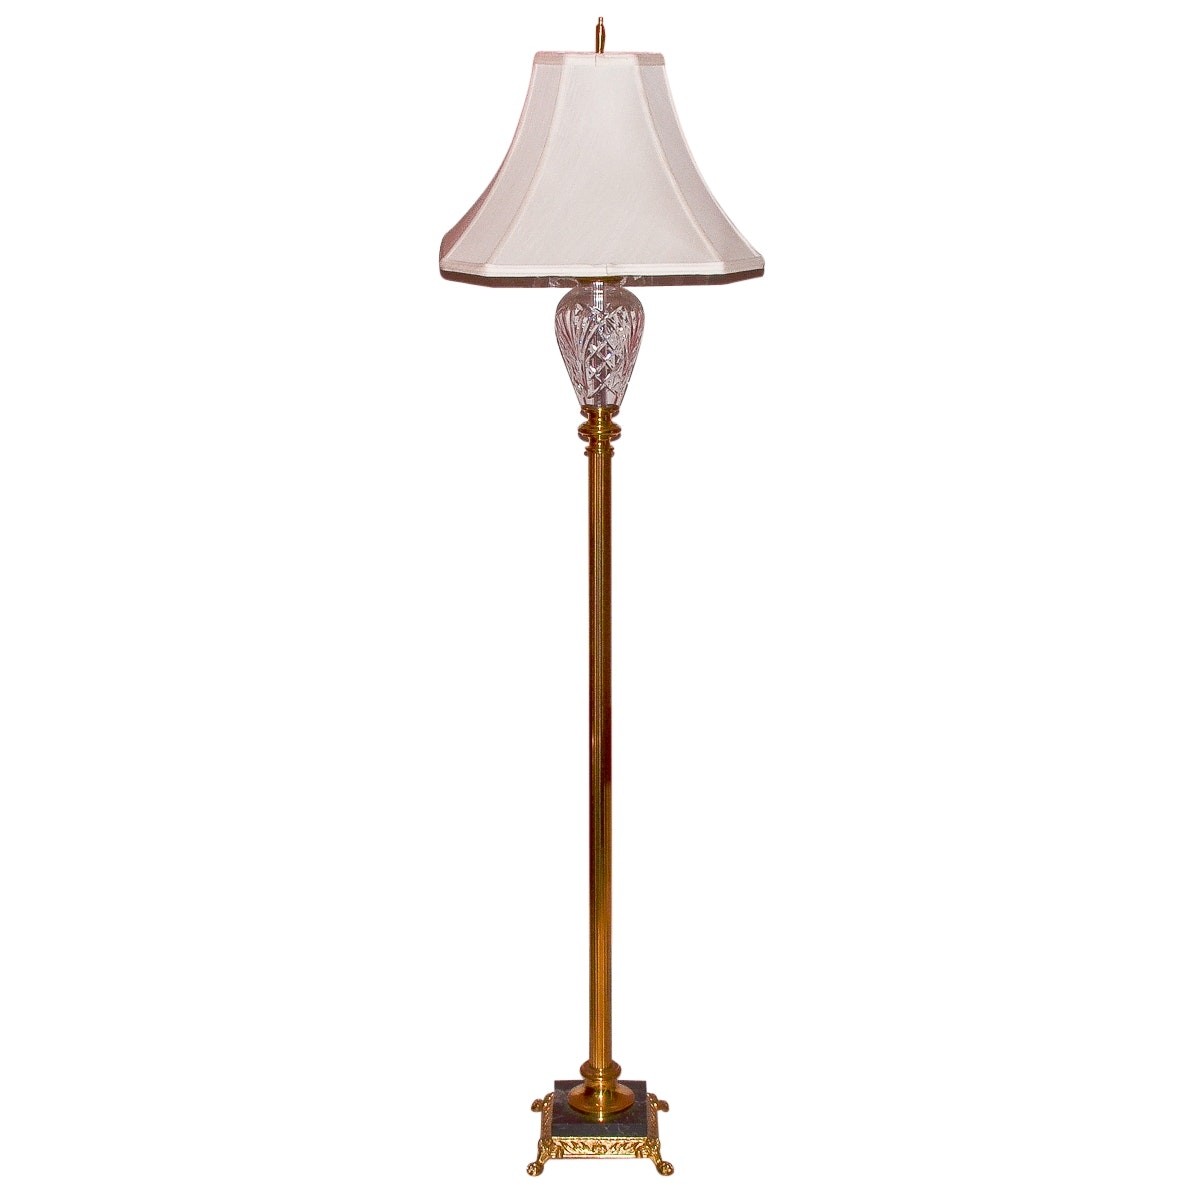 Waterford crystal marlow floor lamp with waterford